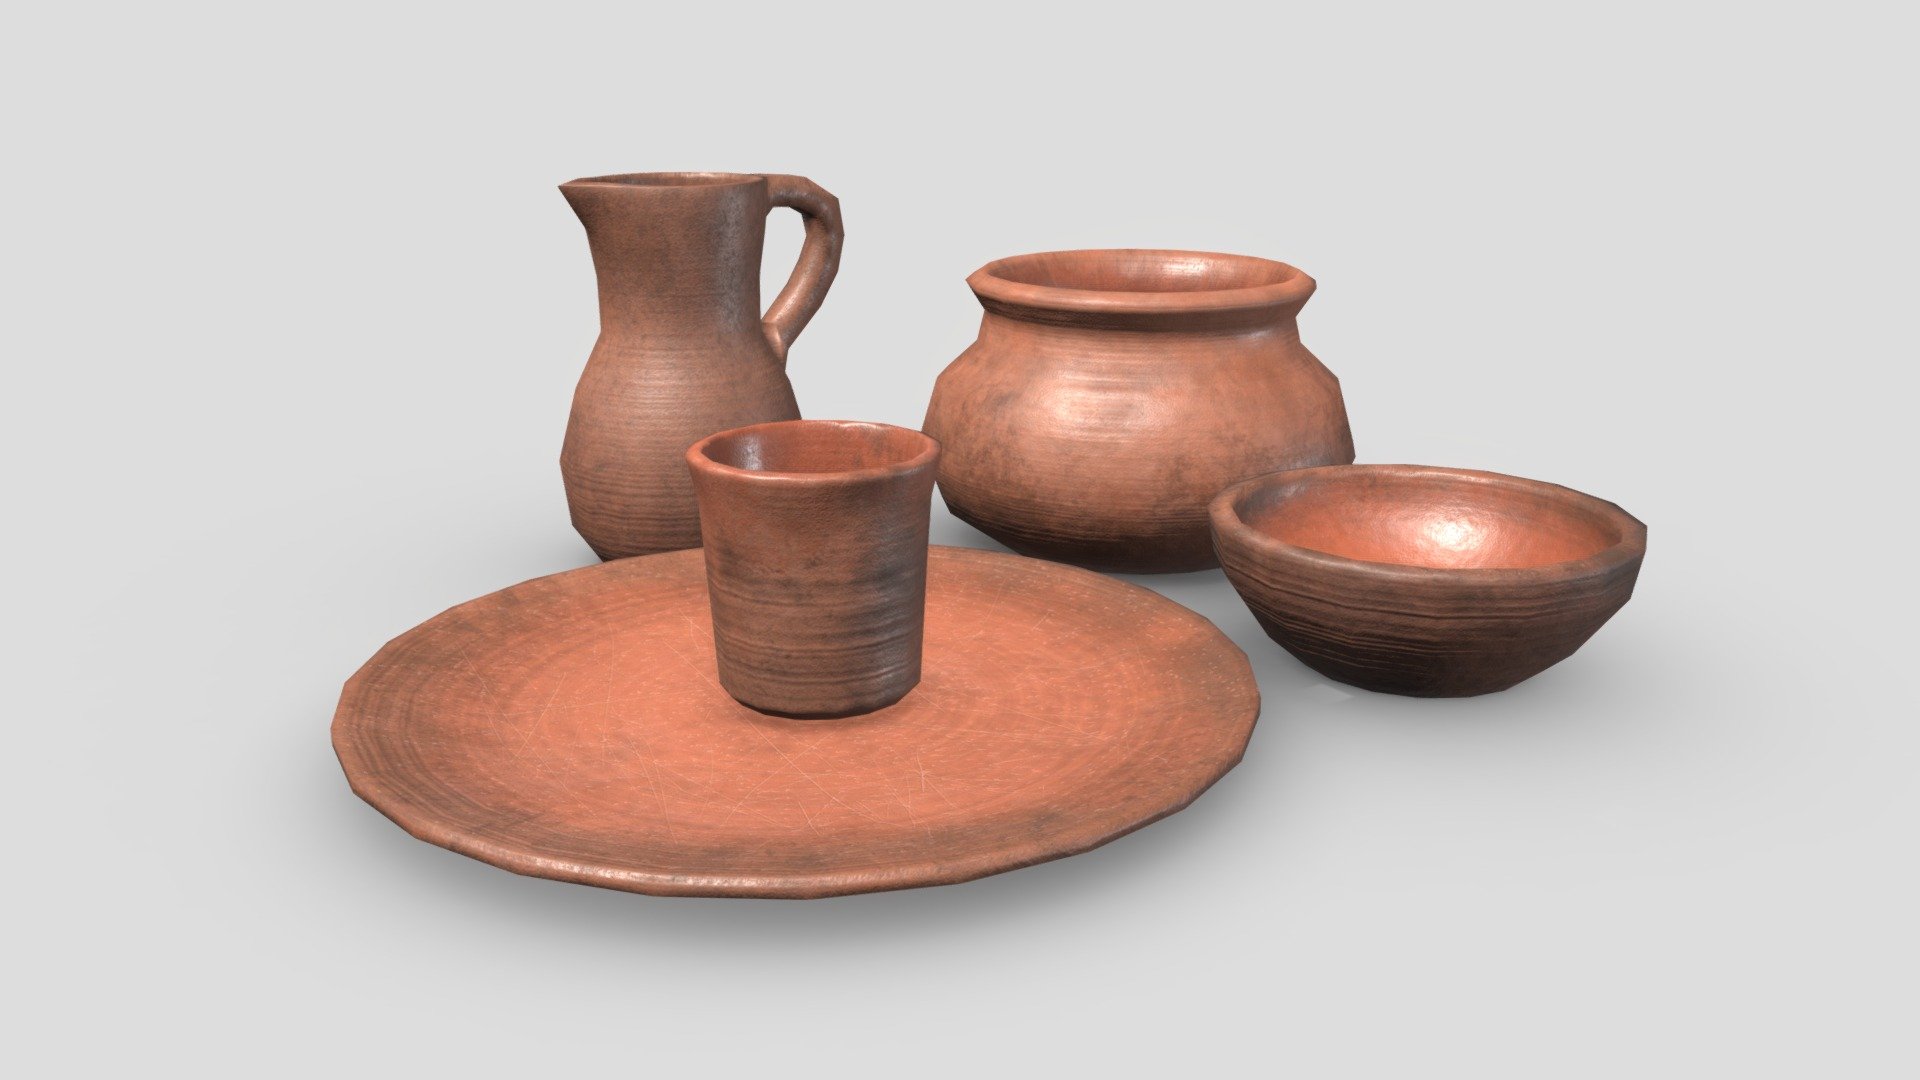 Set of clay tableware with five pieces: bowl, pot, pitcher, dish and glass.

All pieces share the same material/textures.
4K textures: Albedo, Roughness, Color and AmbientOcclusion

Formats: .fbx and .obj

Individual files for each piece are included in the Additional File 3d model